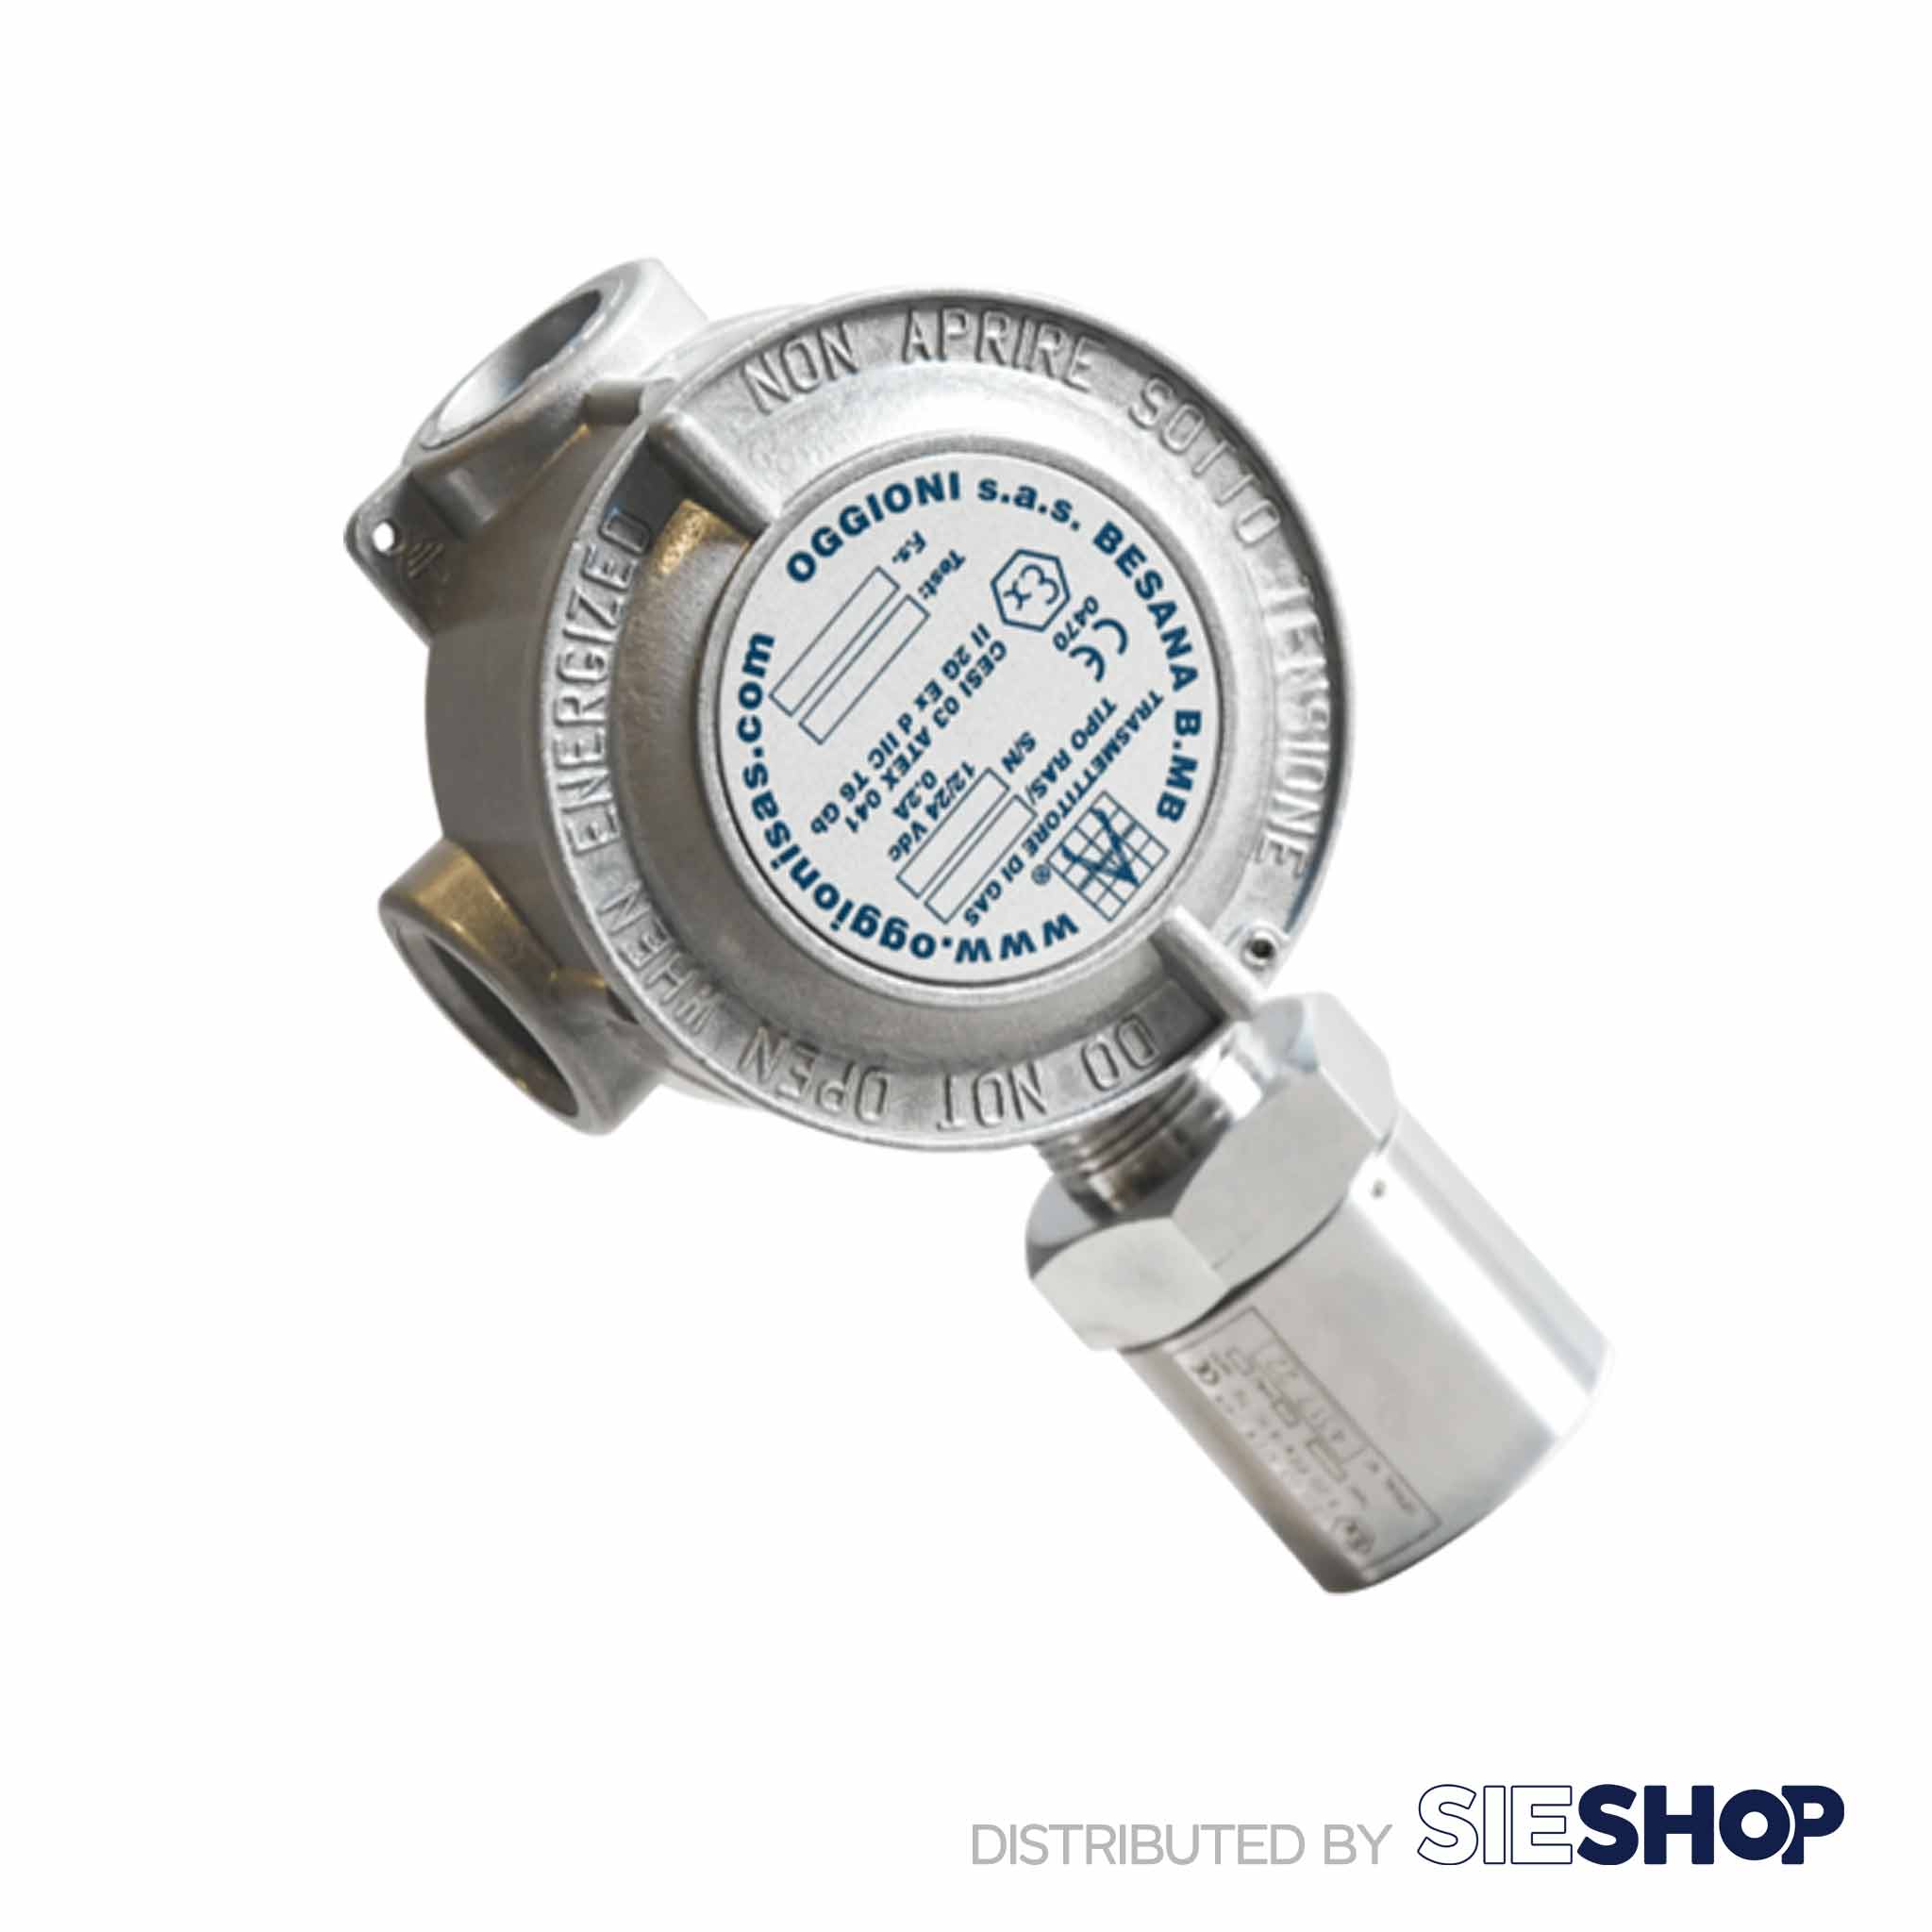 Oggioni RAS/AD Gas Detector for O2 with Electrochemical Cell - SIESHOP